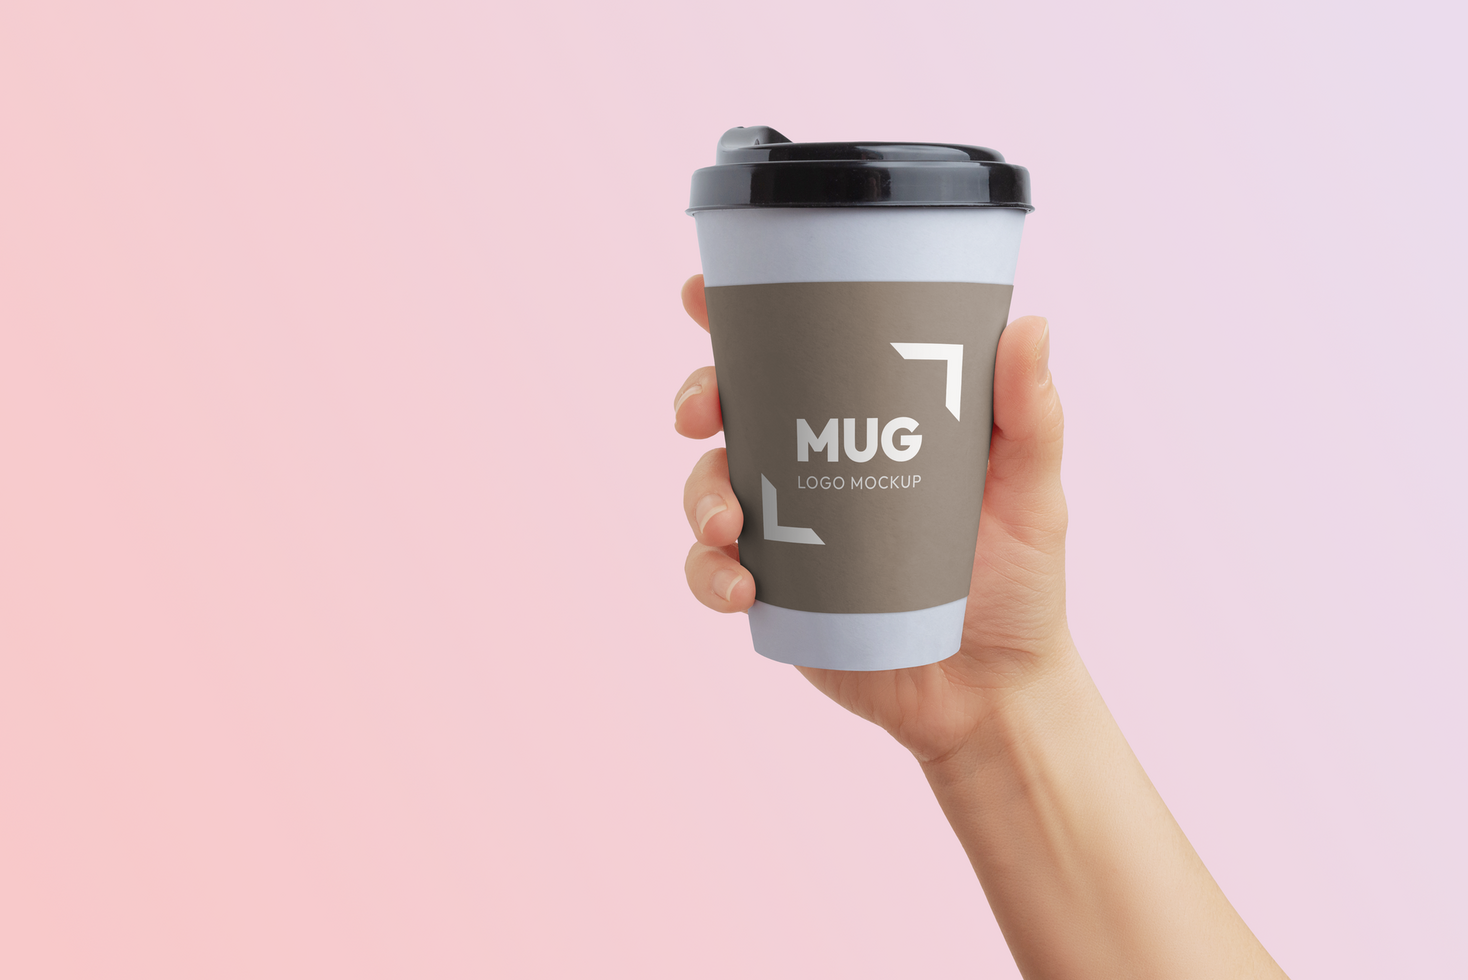 Paper cup with sleeve, changeable colors, held in hand. Logo branding mockup psd